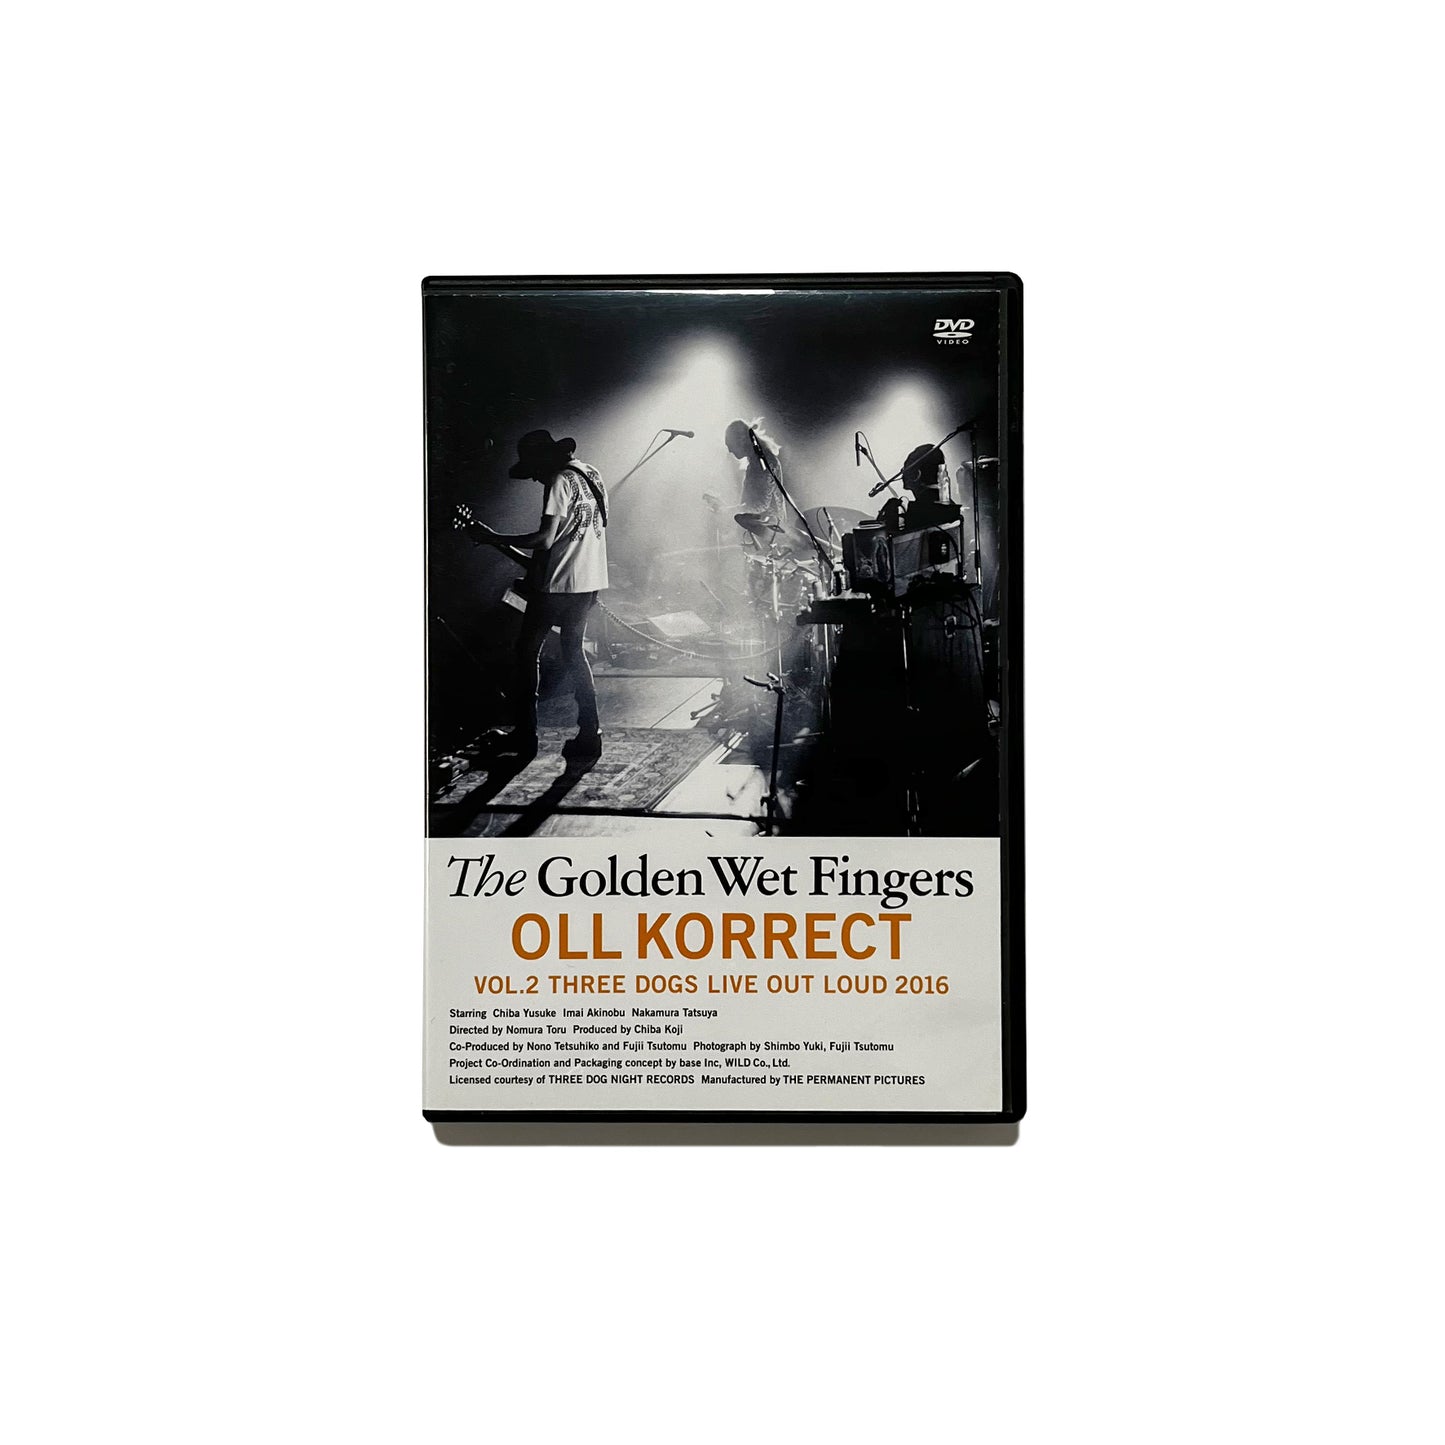 The Golden Wet Fingers / OLL KORRECT VOL.2 THREE DOGS LIVE OUT LOUD 2016